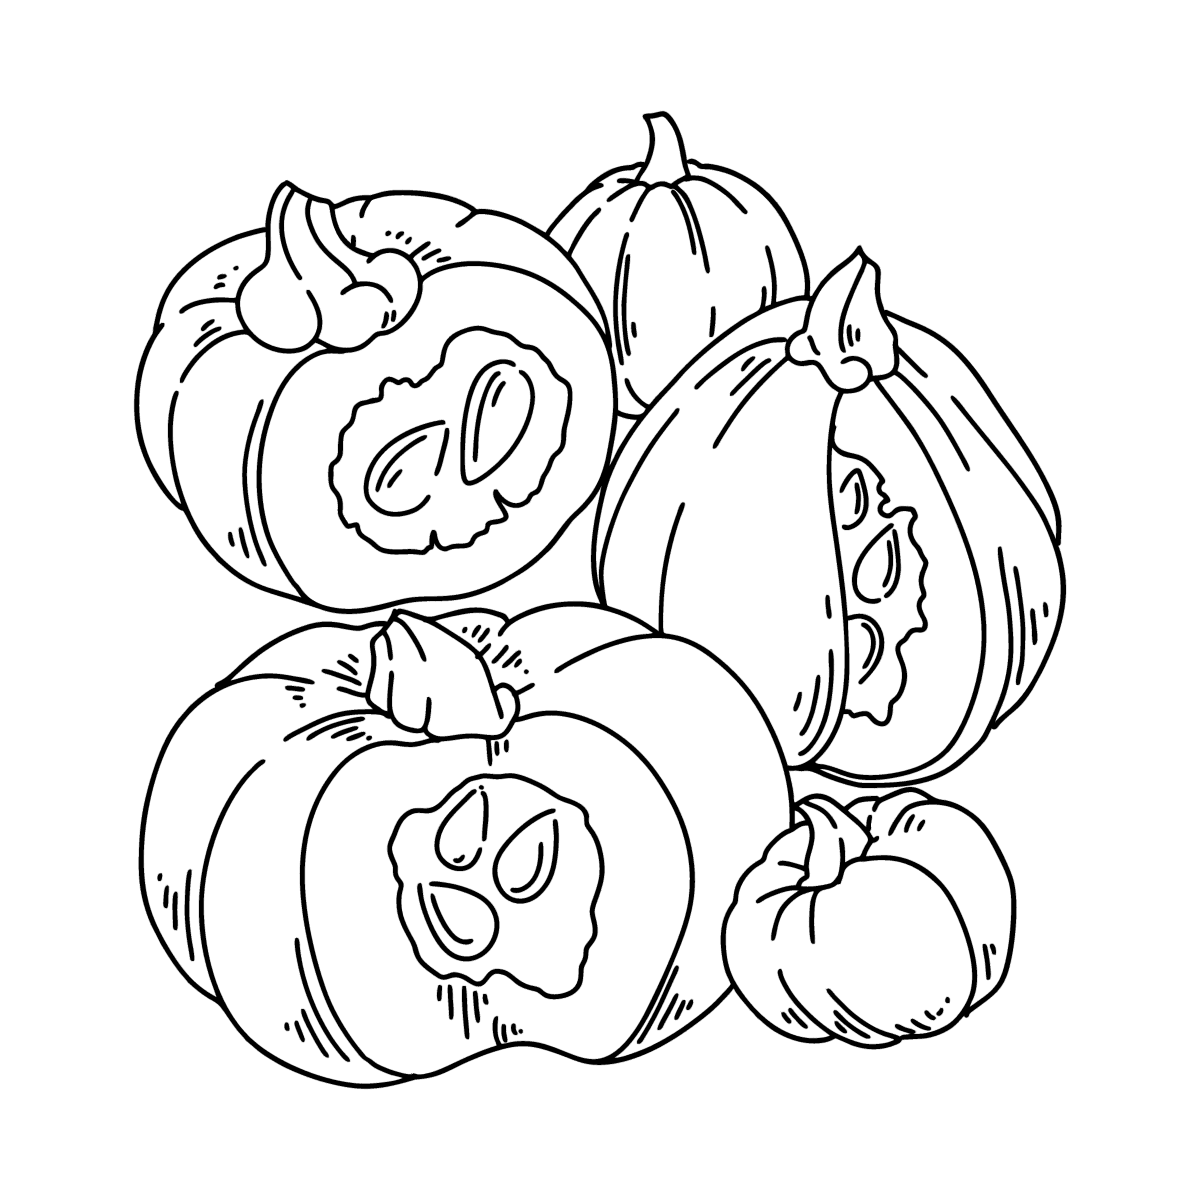 Coloring page Autumn - Pumpkin harvest ♥ Online and Print!